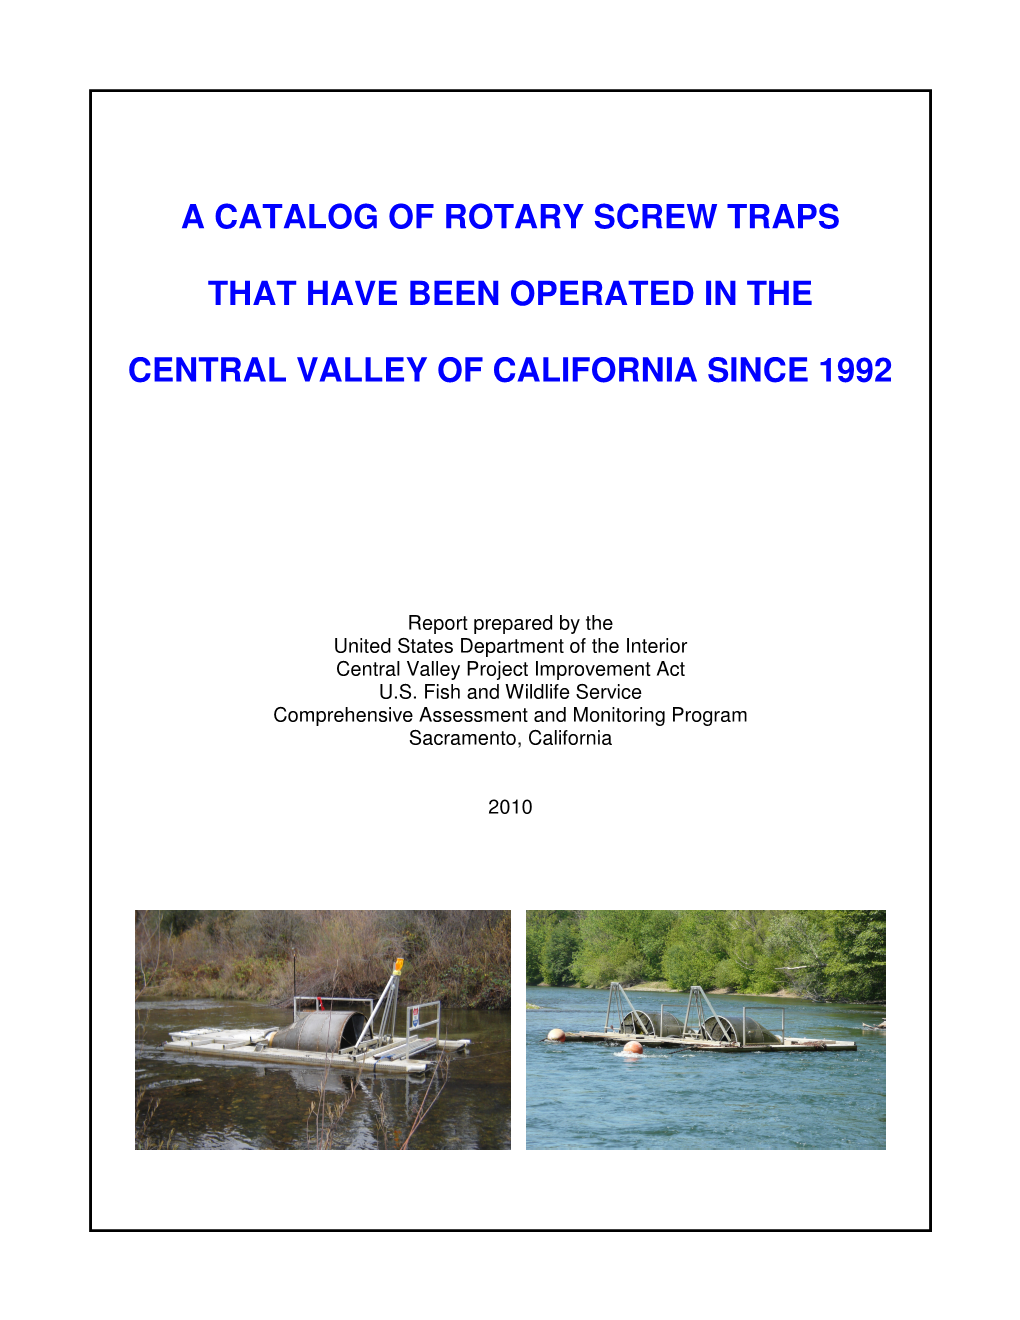 Catalog of Rotary Screw Traps That Have Been Operated in the Central Valley of California Since 1992